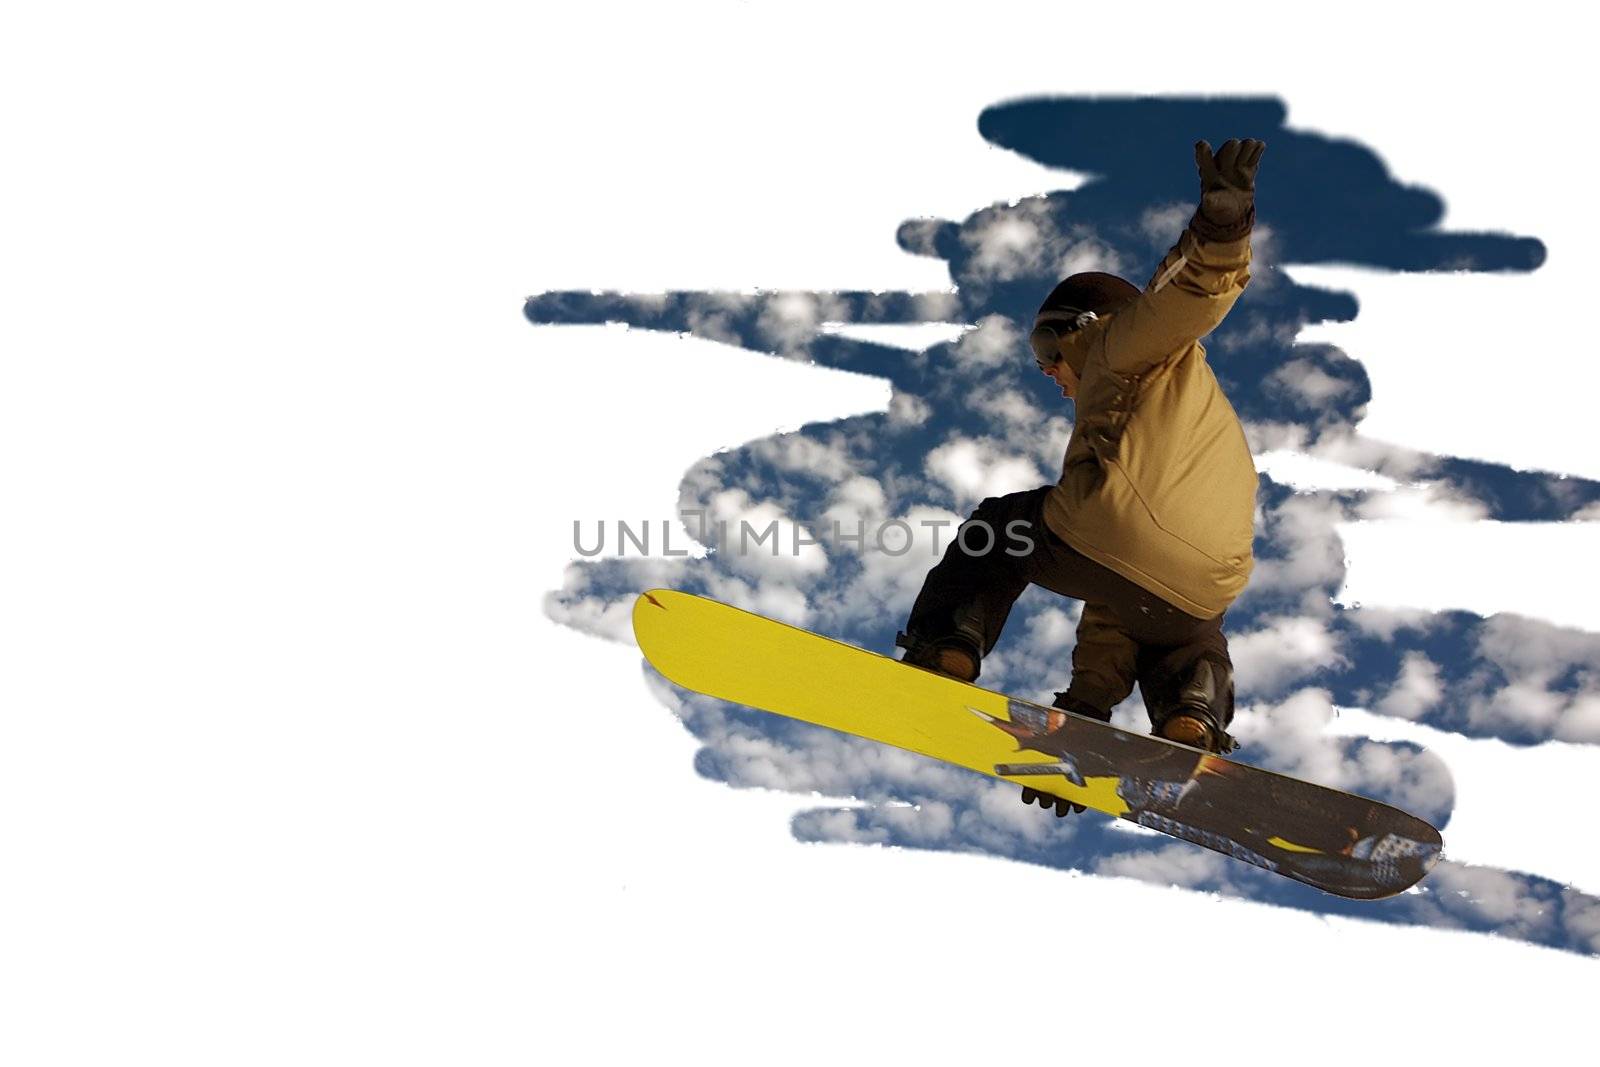 blue sky with snowboarder by raalves